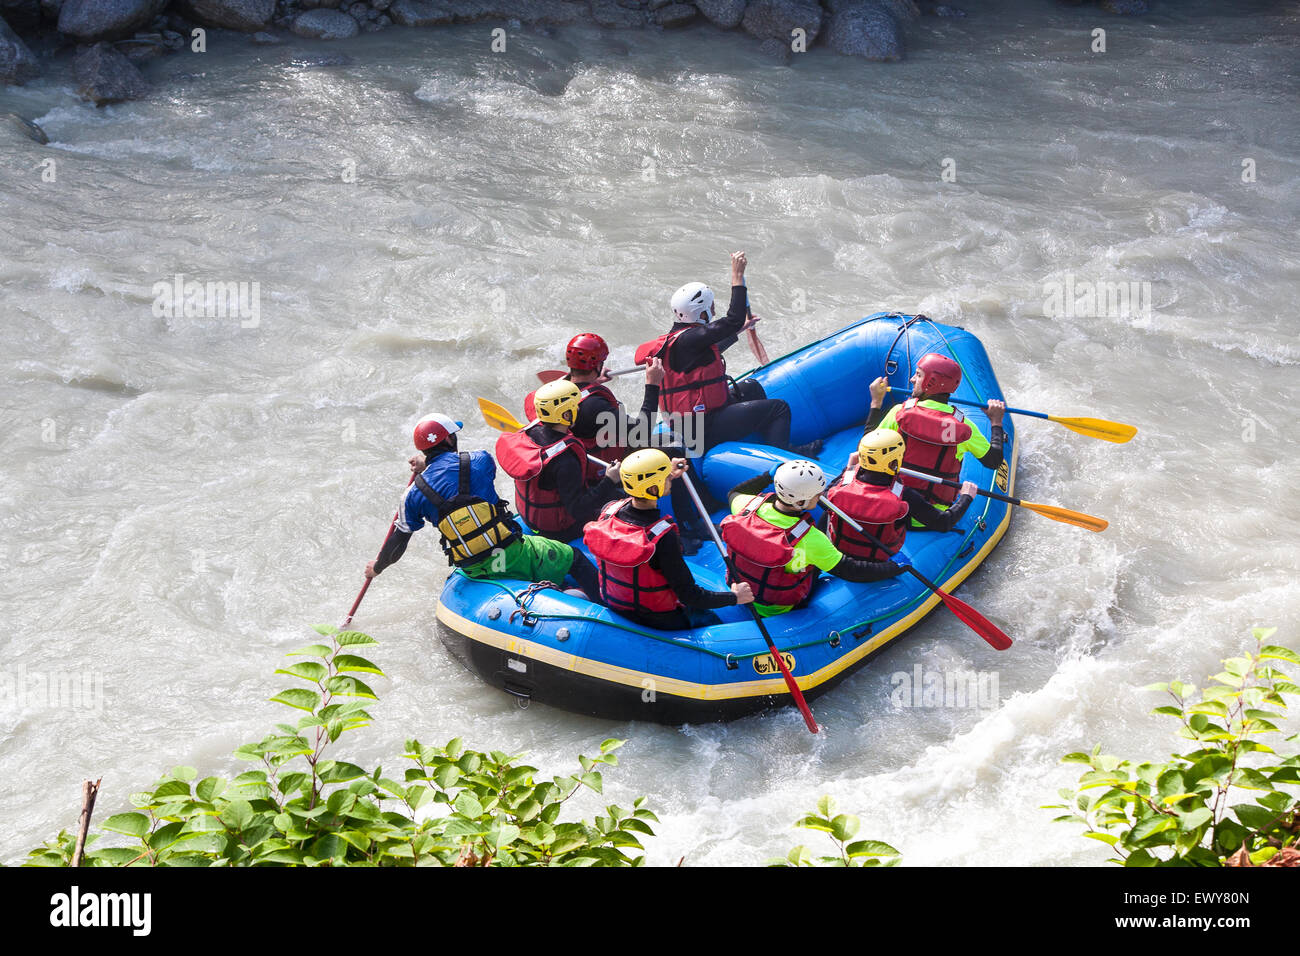 White water river rafting on L'Arve river in Chamonix Mont Blanc valley, France. August. Stock Photo